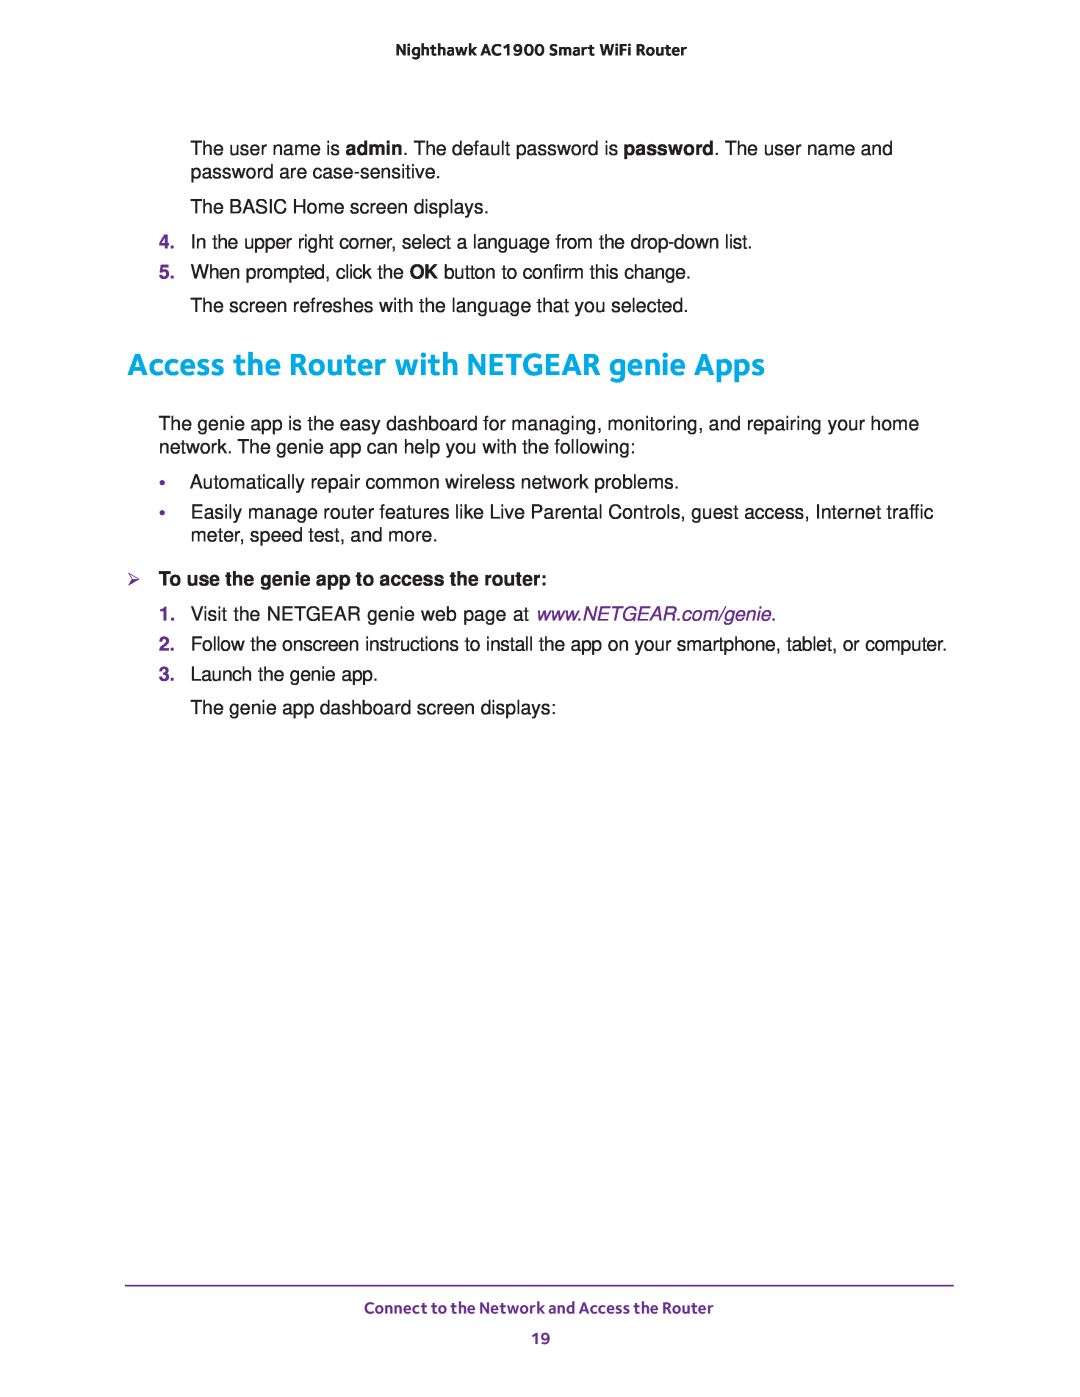 NETGEAR Model R7000 user manual Access the Router with NETGEAR genie Apps,  To use the genie app to access the router 